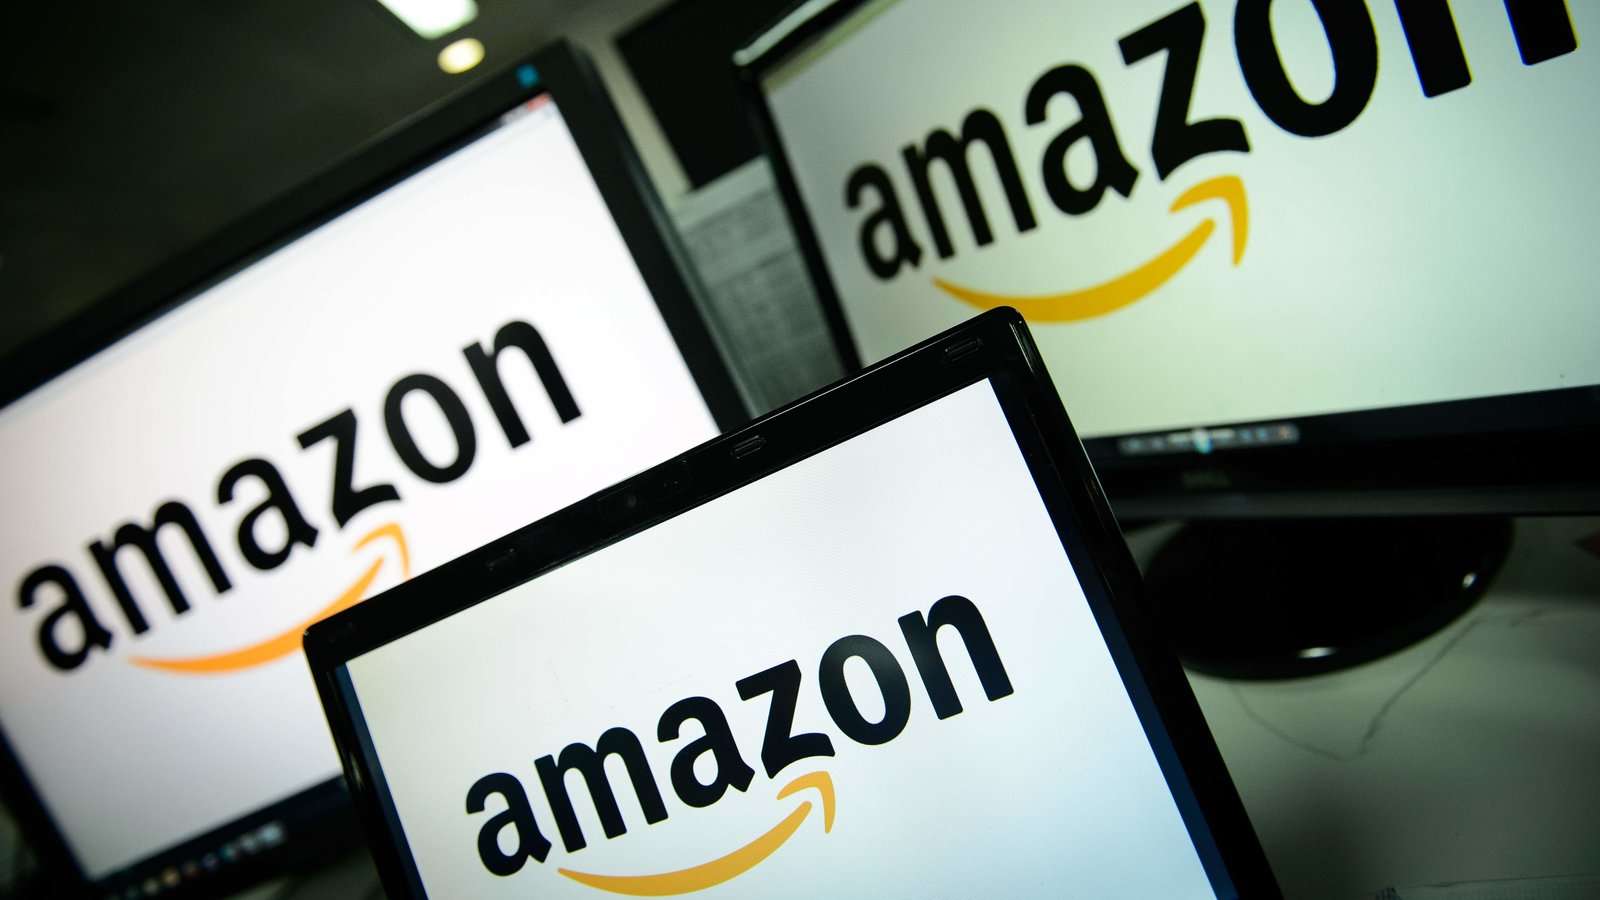 Amazon Offers Prime Discount for Medicaid Recipients